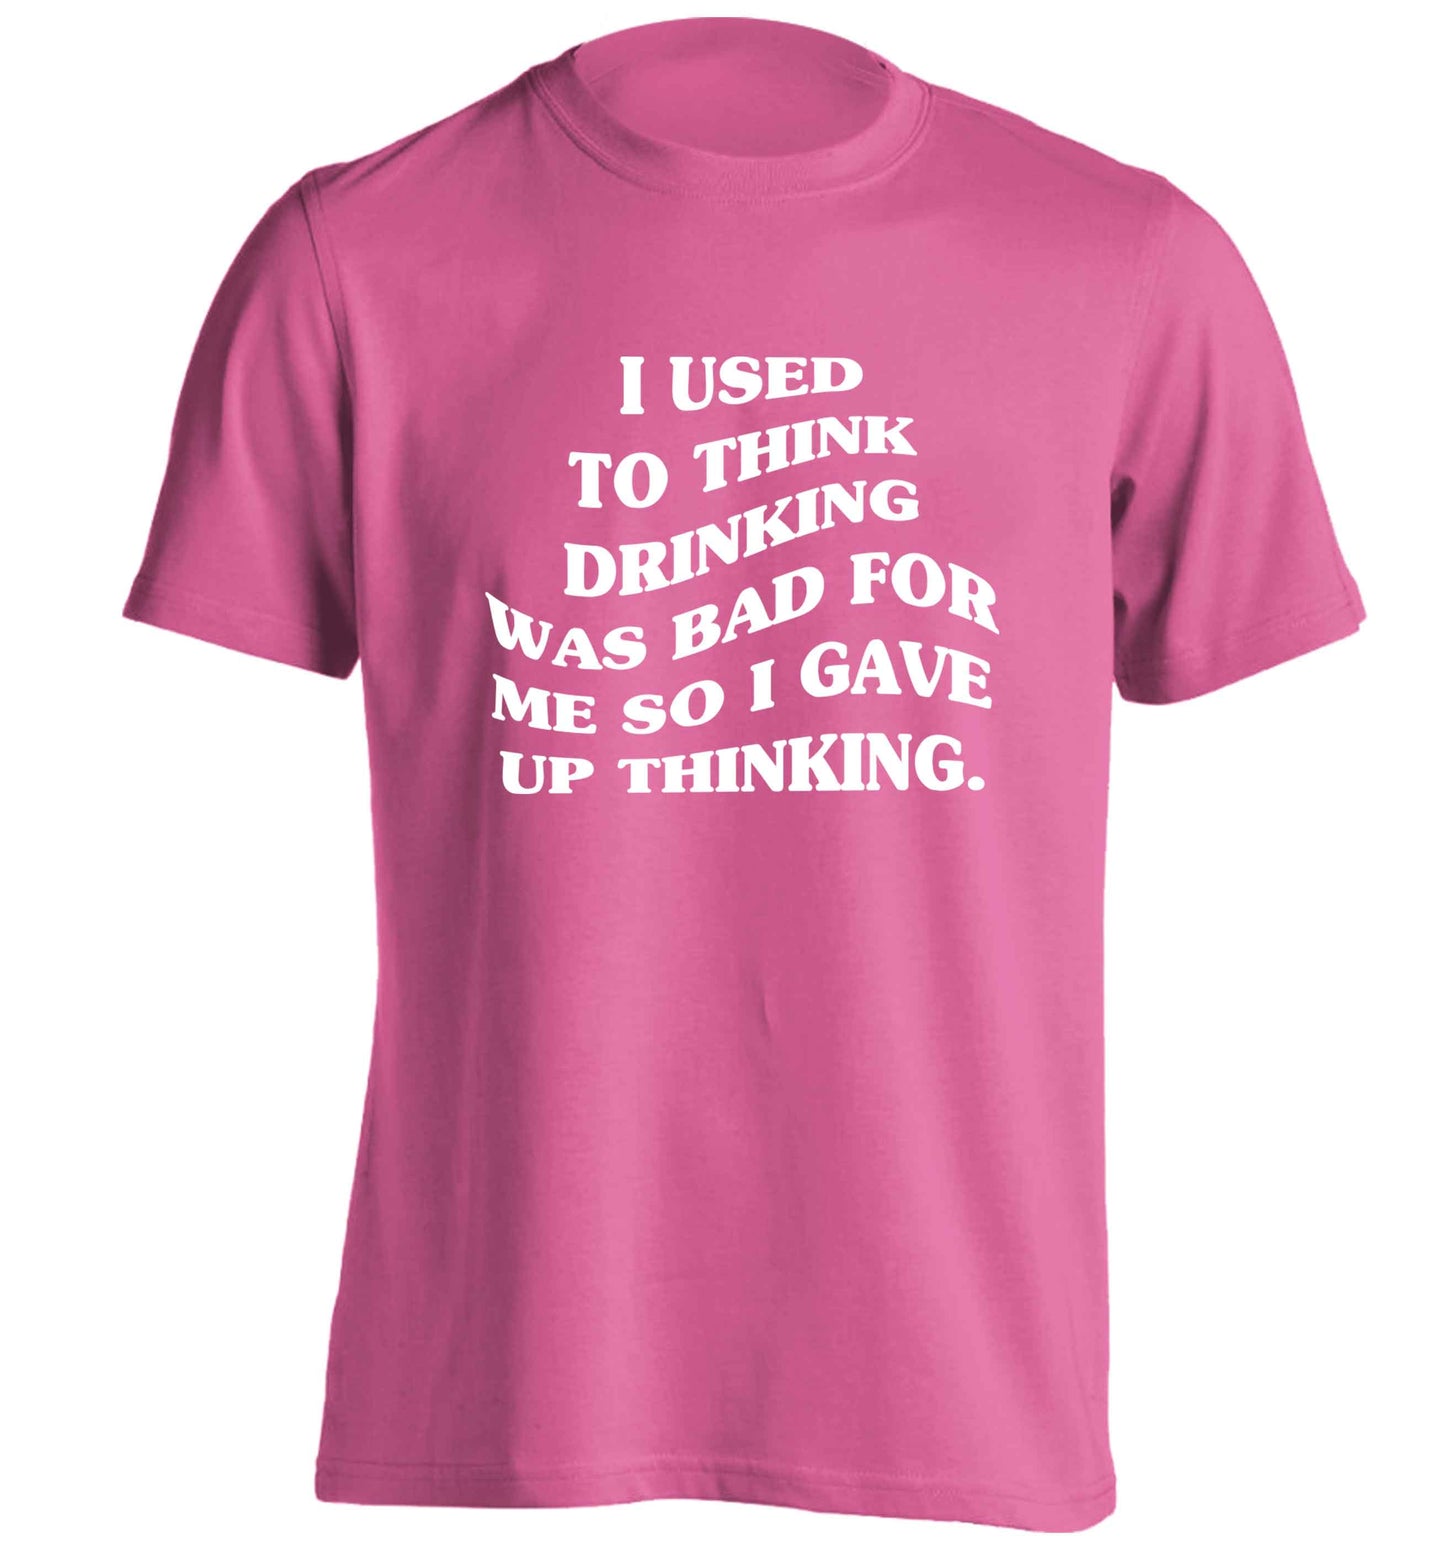 I used to think drinking was bad so I gave up thinking adults unisex pink Tshirt 2XL